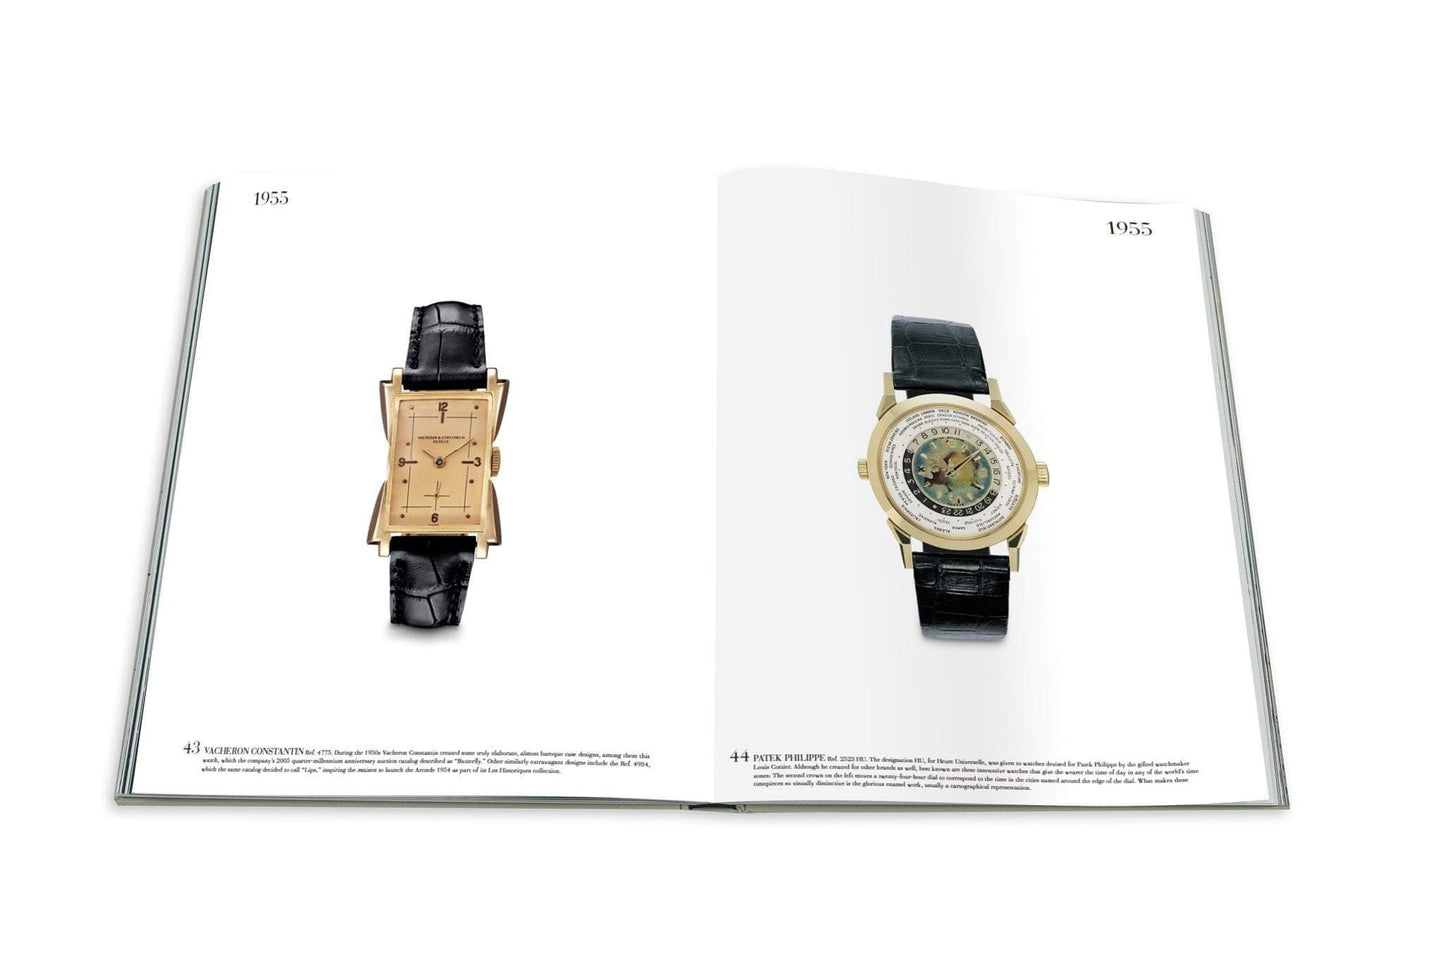 Livre Watches: Impossible collection